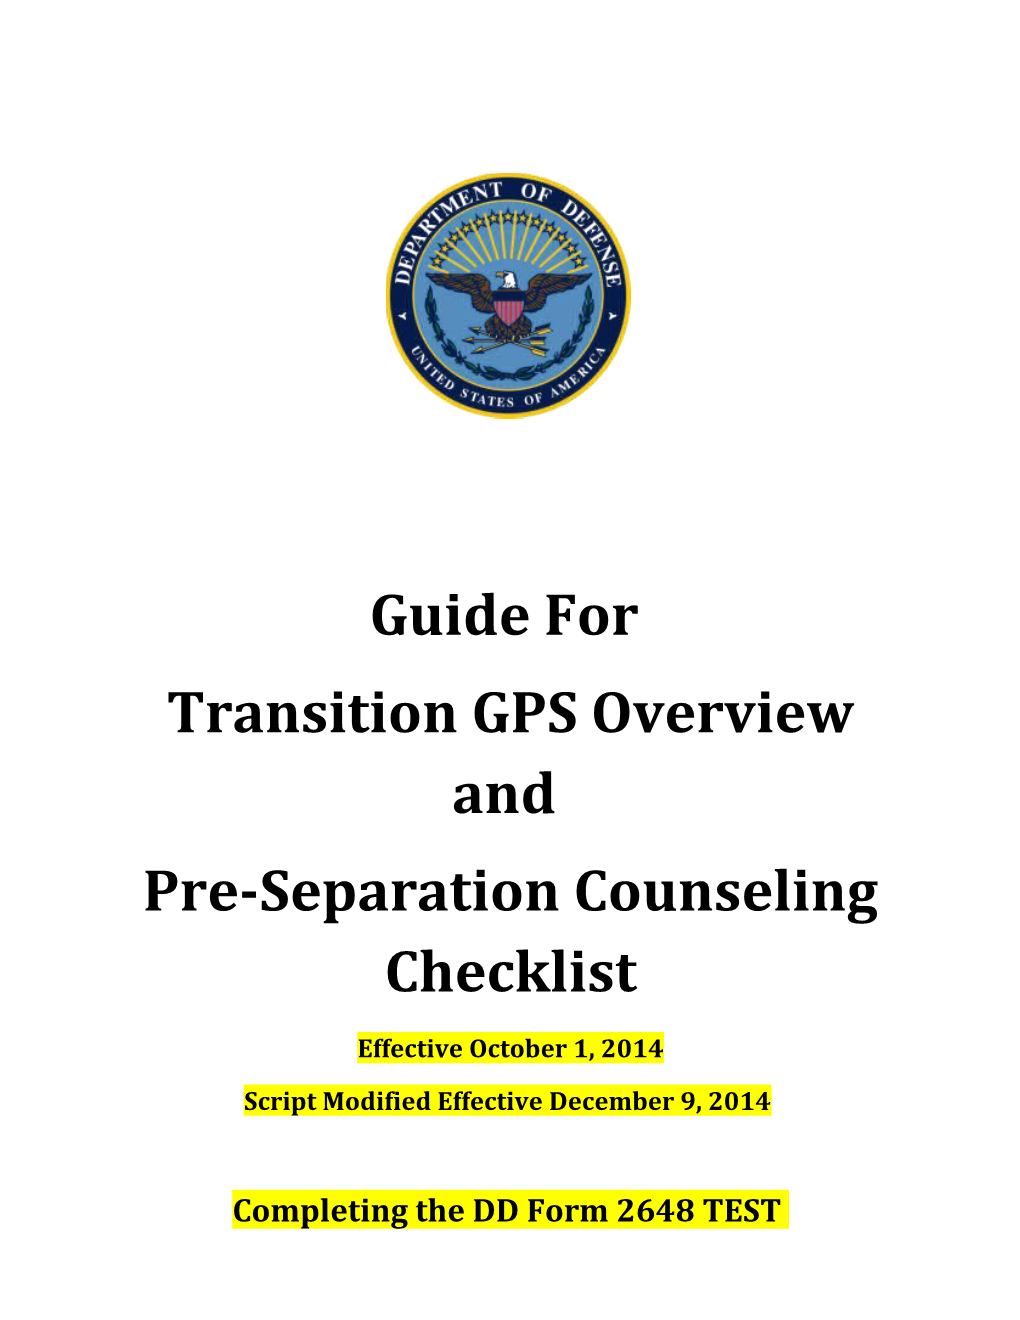 Transition GPS Overview And